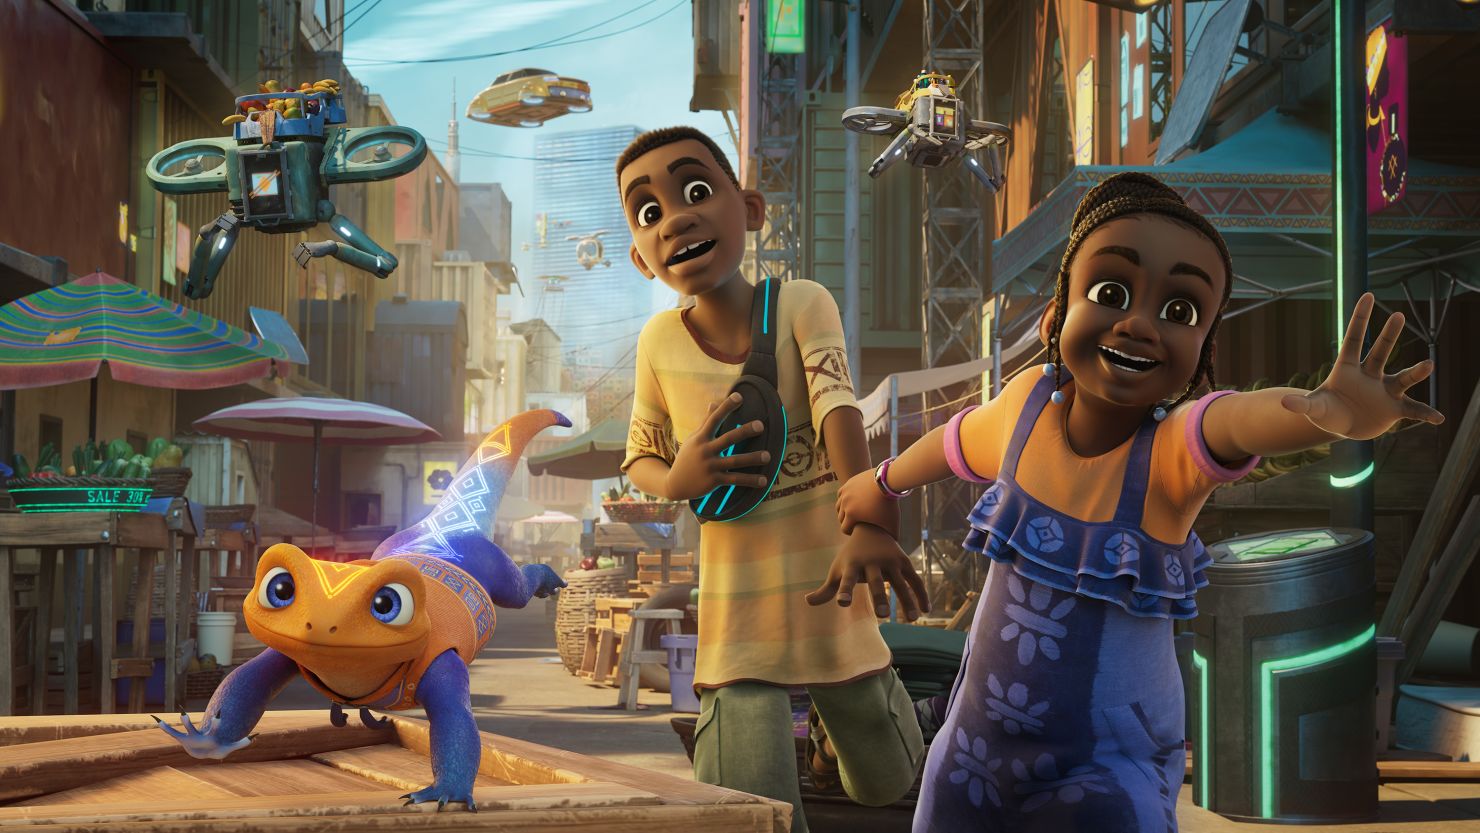 Iwájú is an animated coming-of-age story set in a futuristic Lagos, featuring Tola (right) and her best friend Kole (center), voiced by Nigerian actors Simisola Gbadamosi and Siji Soetan.